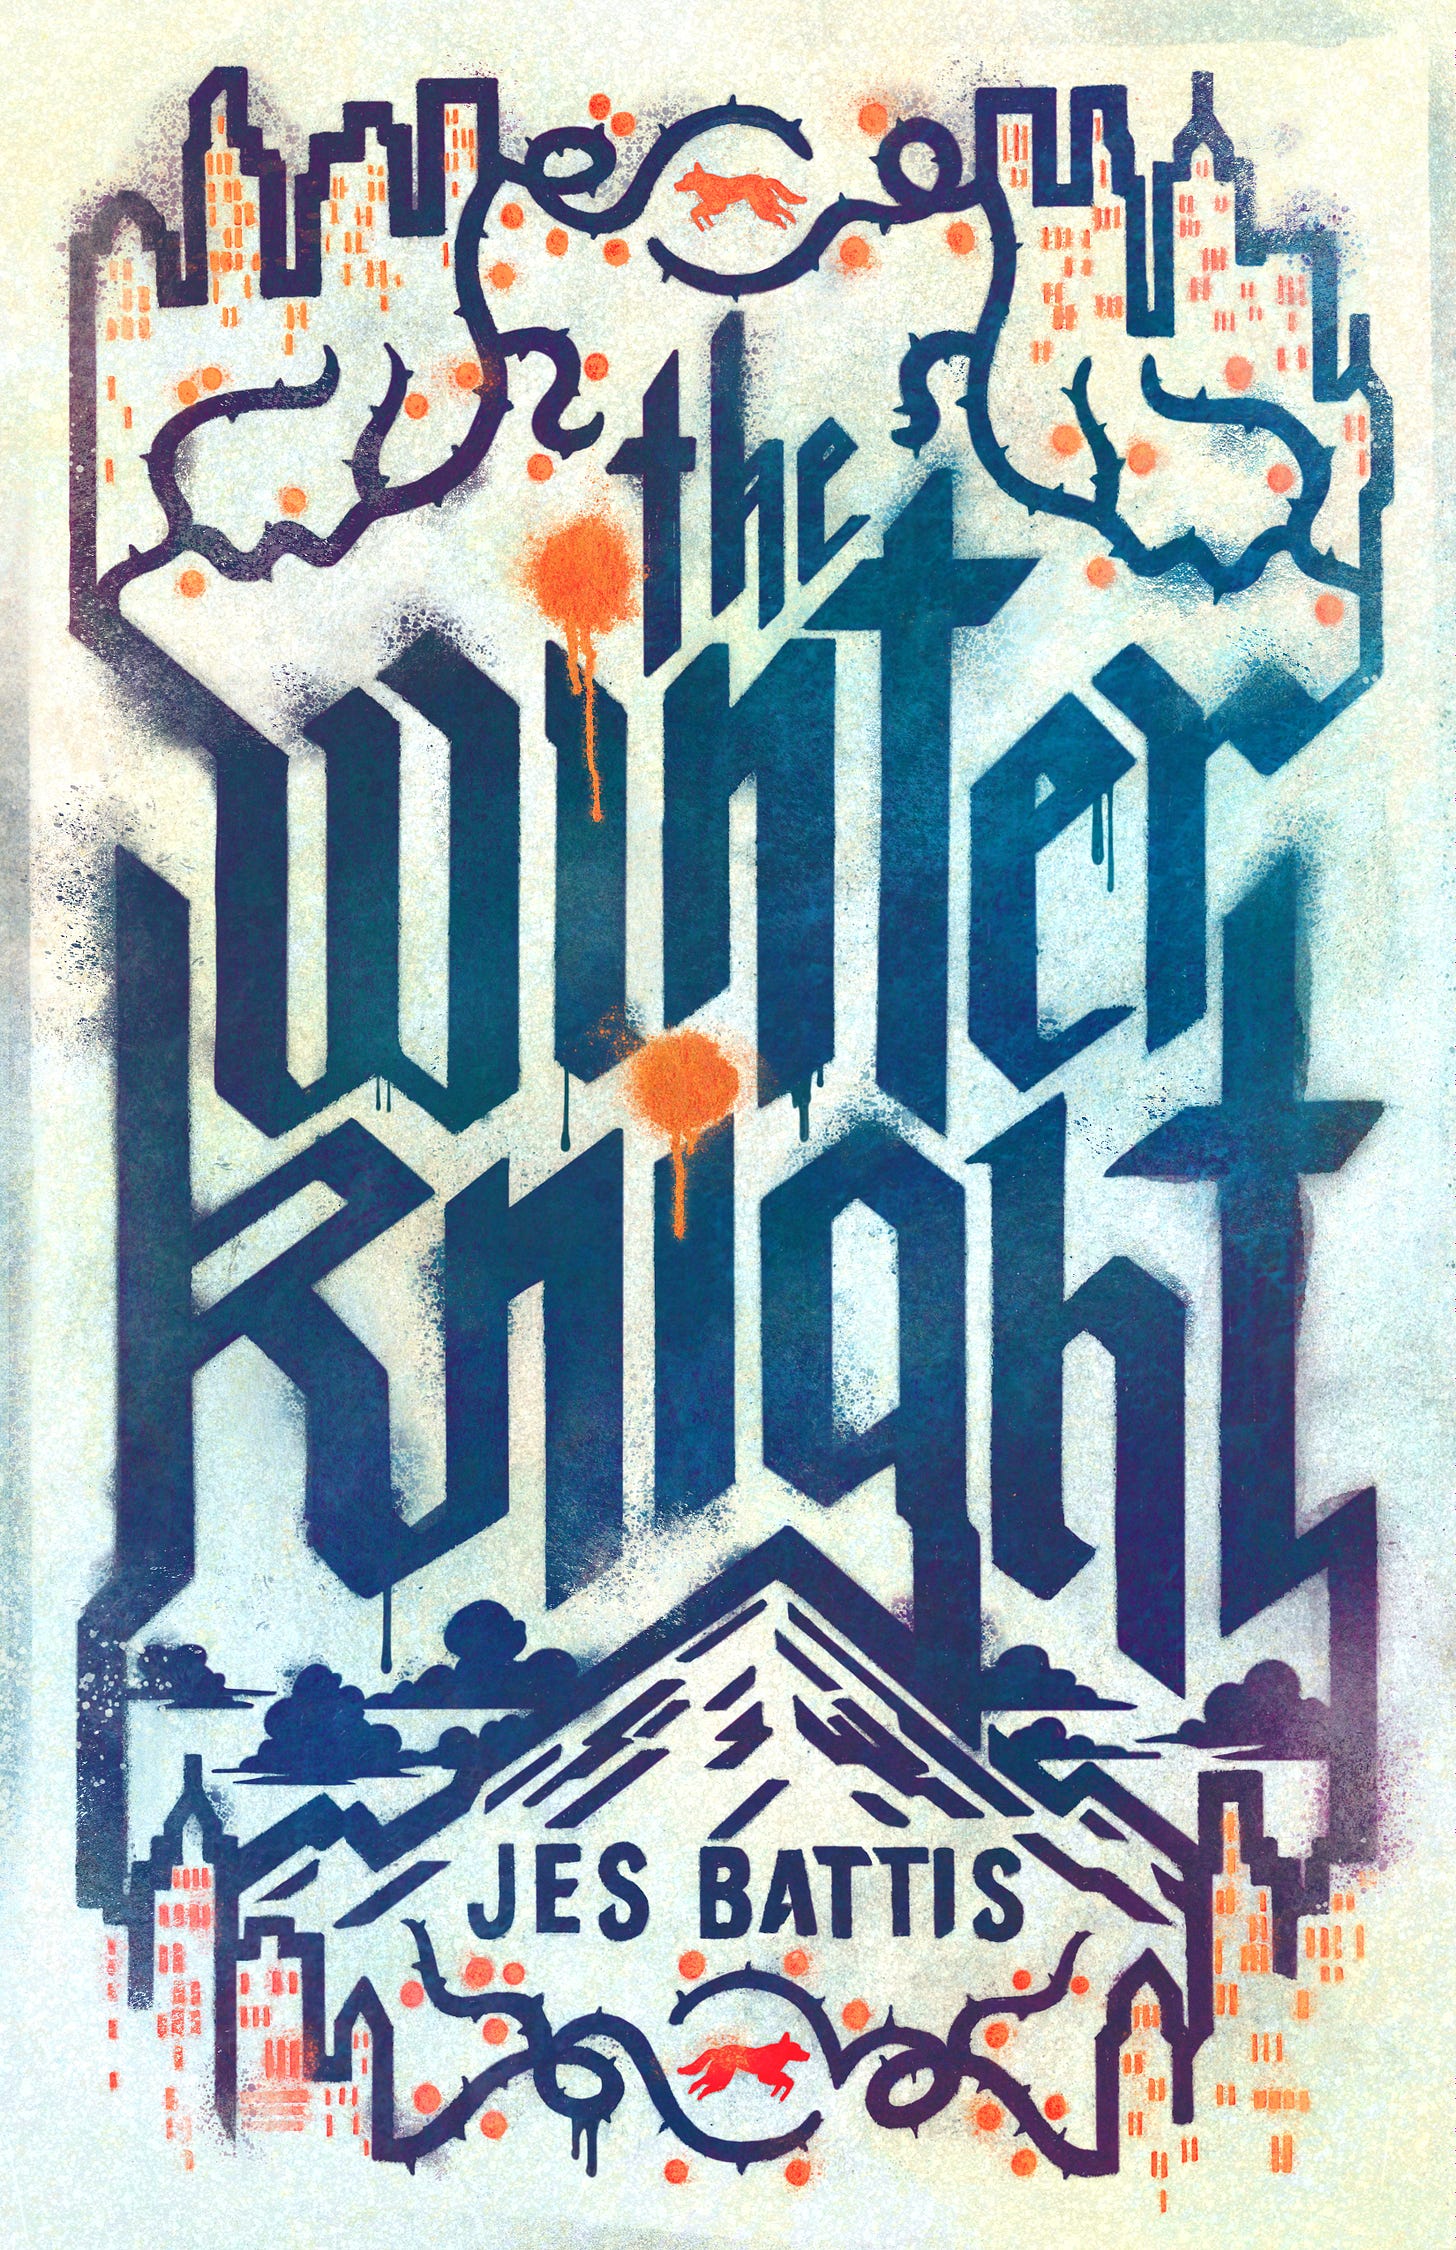 Cover of the book The Winter Knight by Jes Battis. The title and author are written in stylized letters along with line art of thorns and urban buildings.